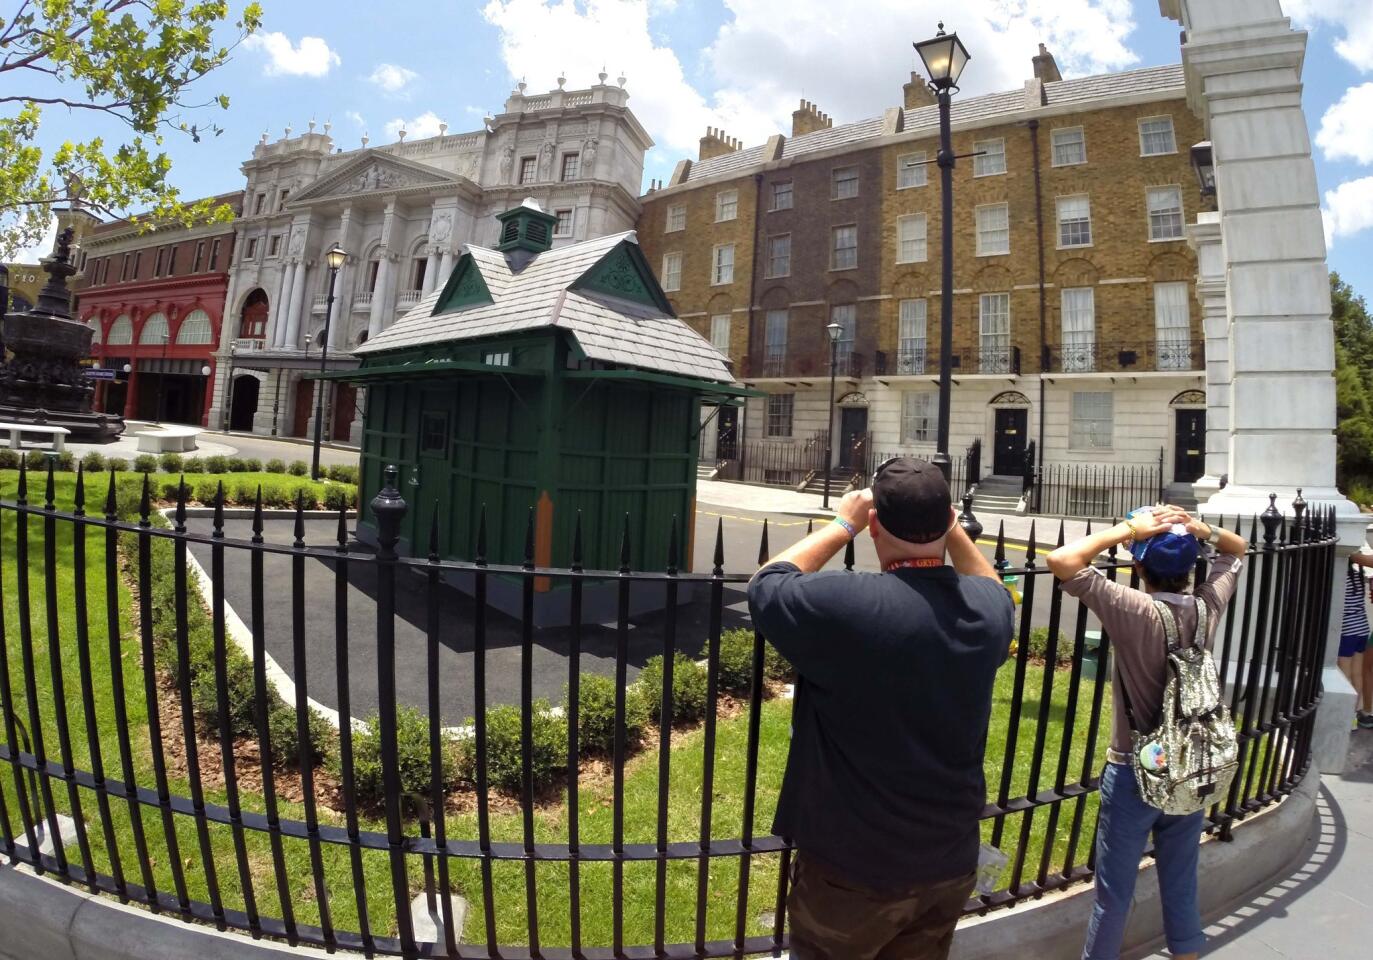 FIRST LOOK AT DIAGON ALLEY